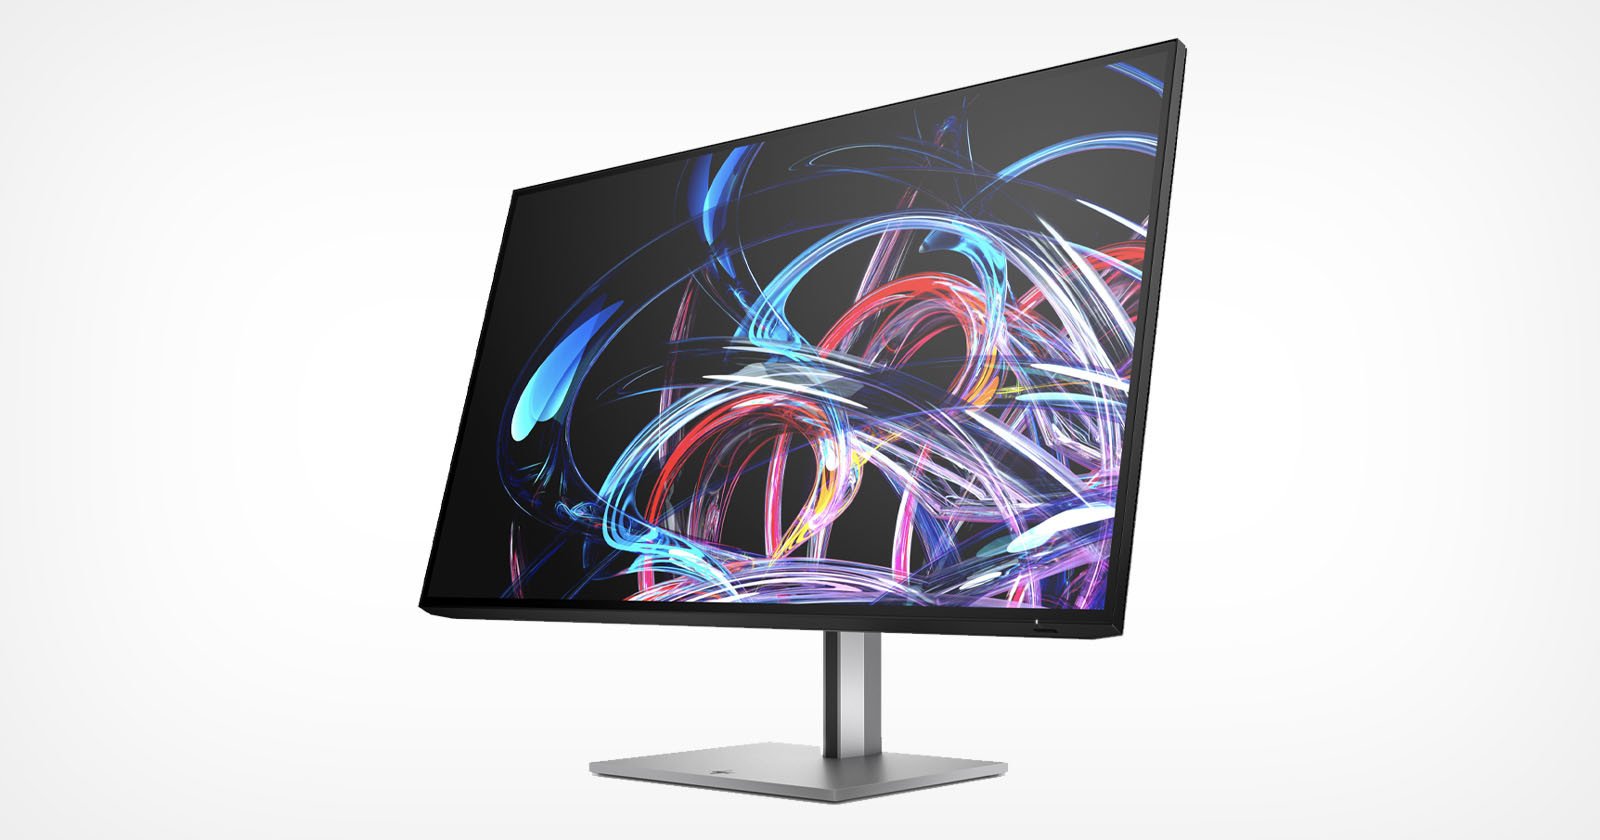 The HP Z32k G3 is a Thunderbolt 4-Equipped Color-Accurate 4K Monitor